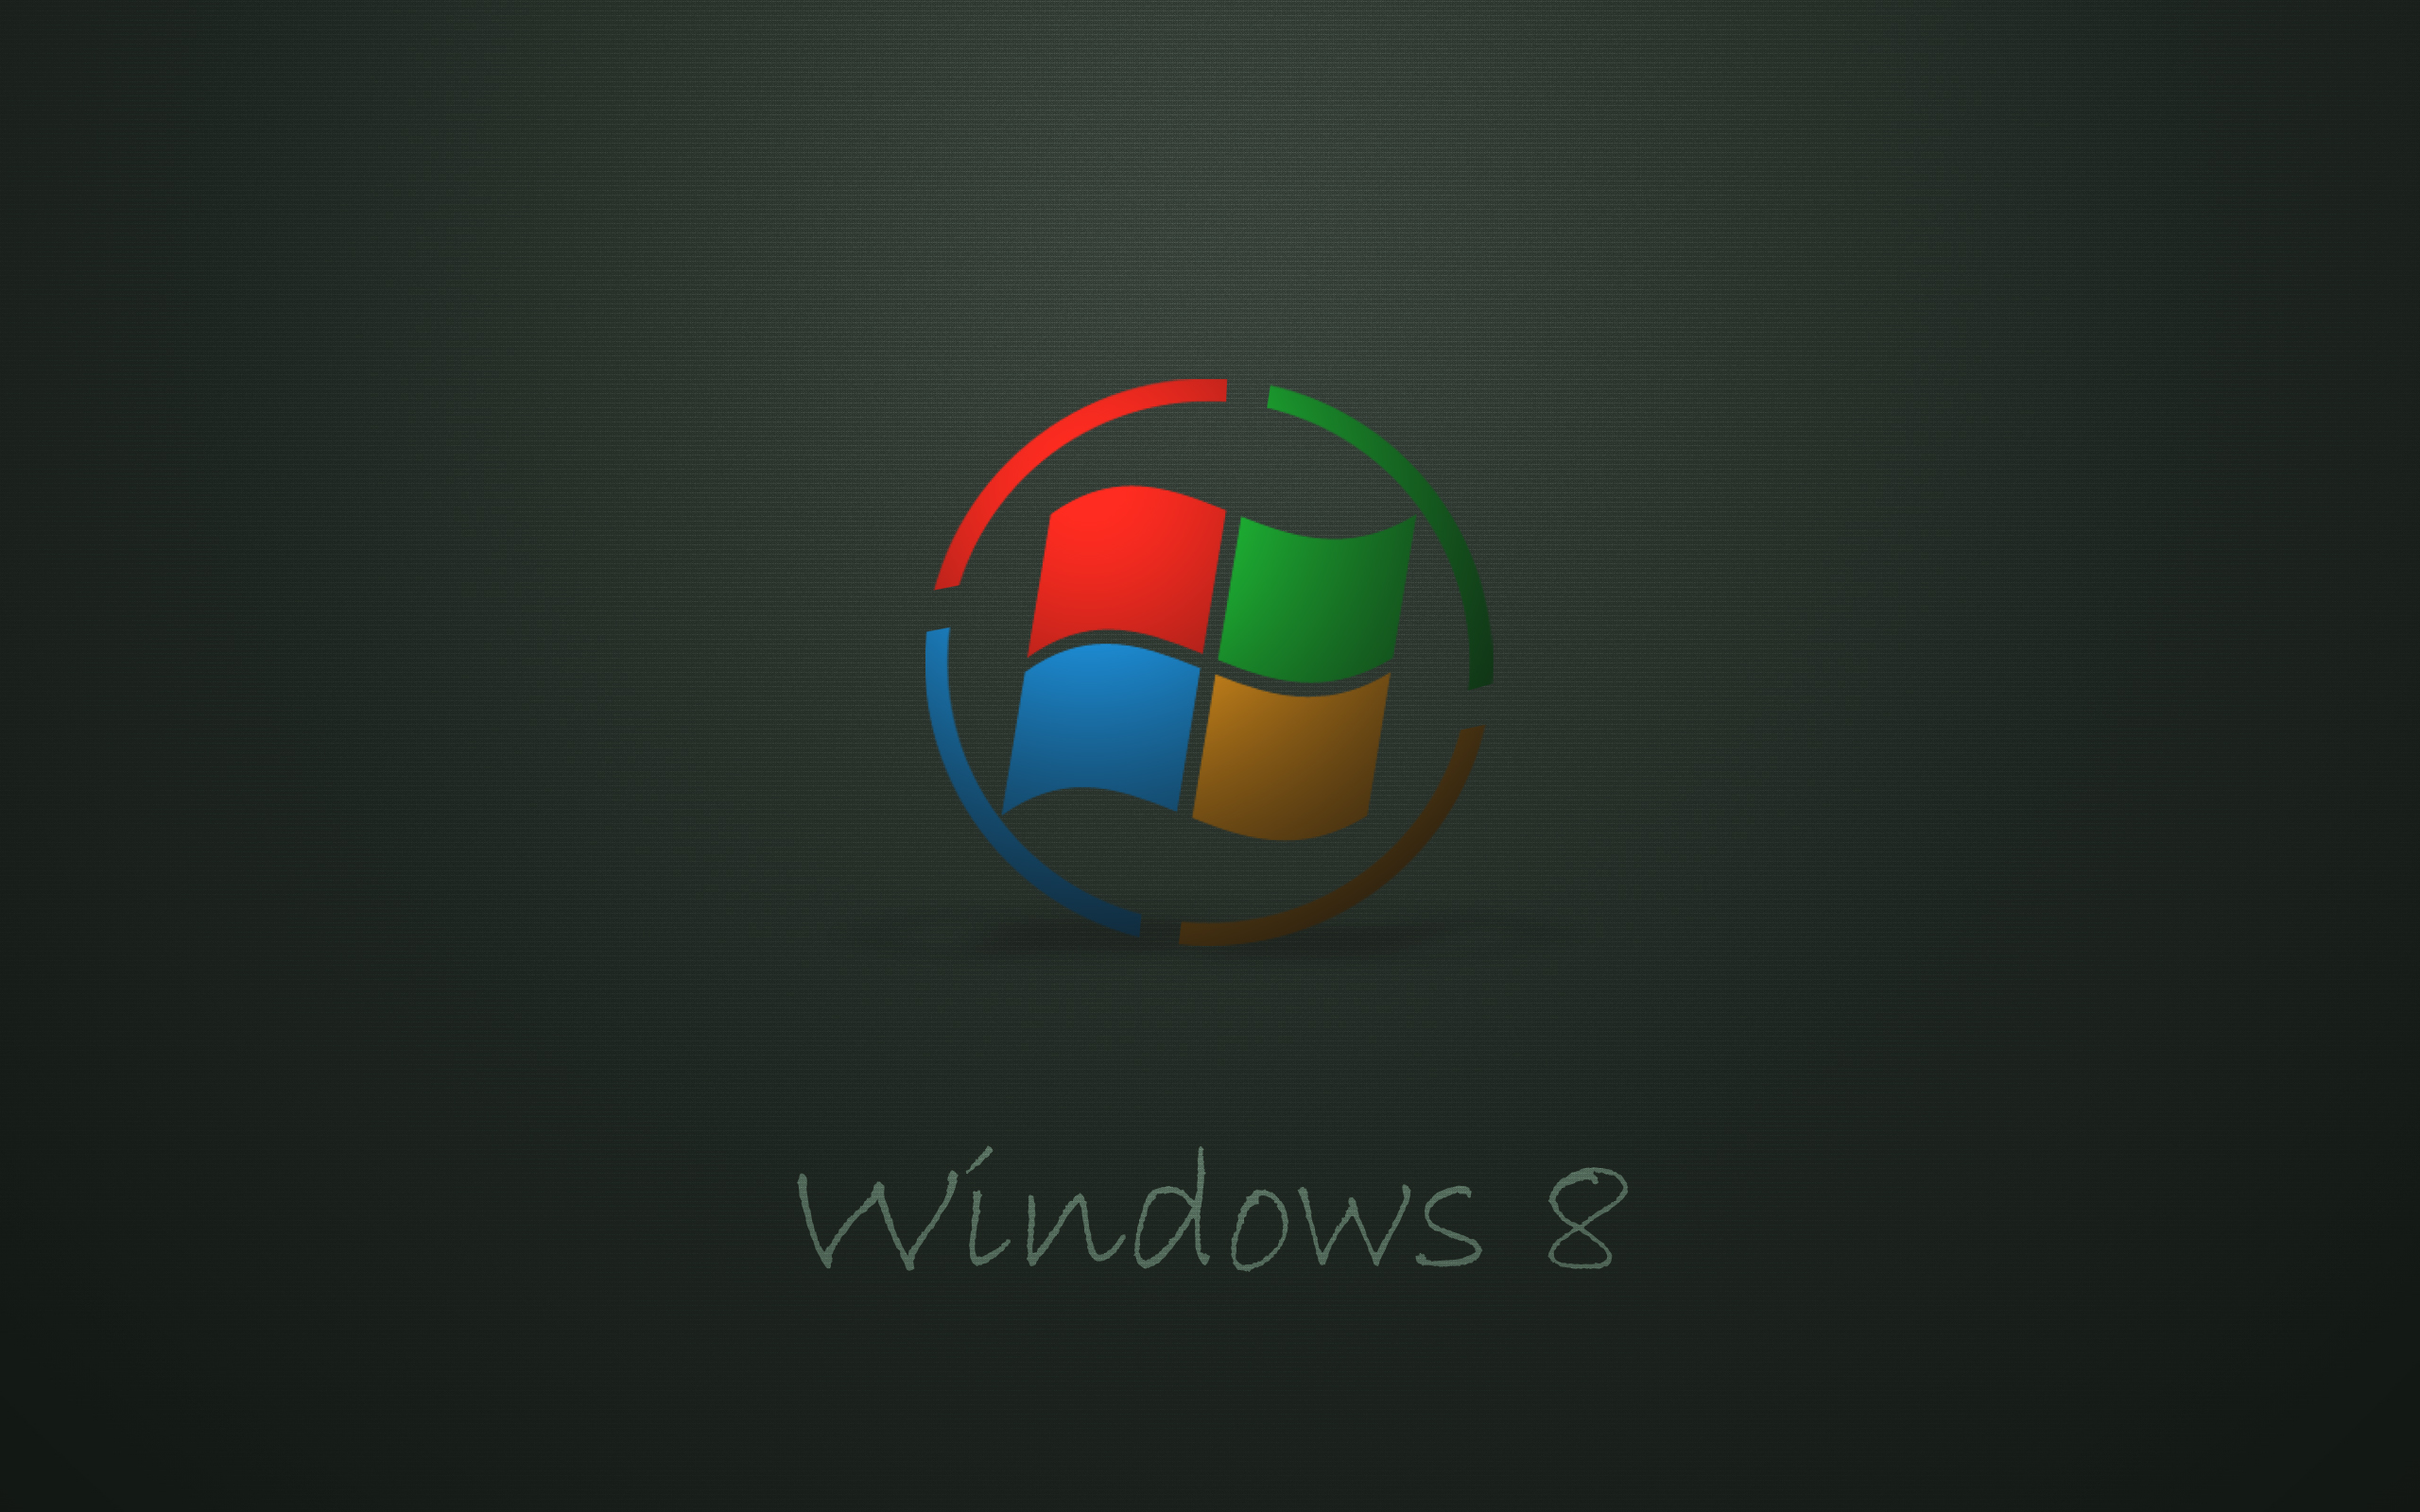 Windows 8 Backgrounds - High-resolution wallpapers for your PC